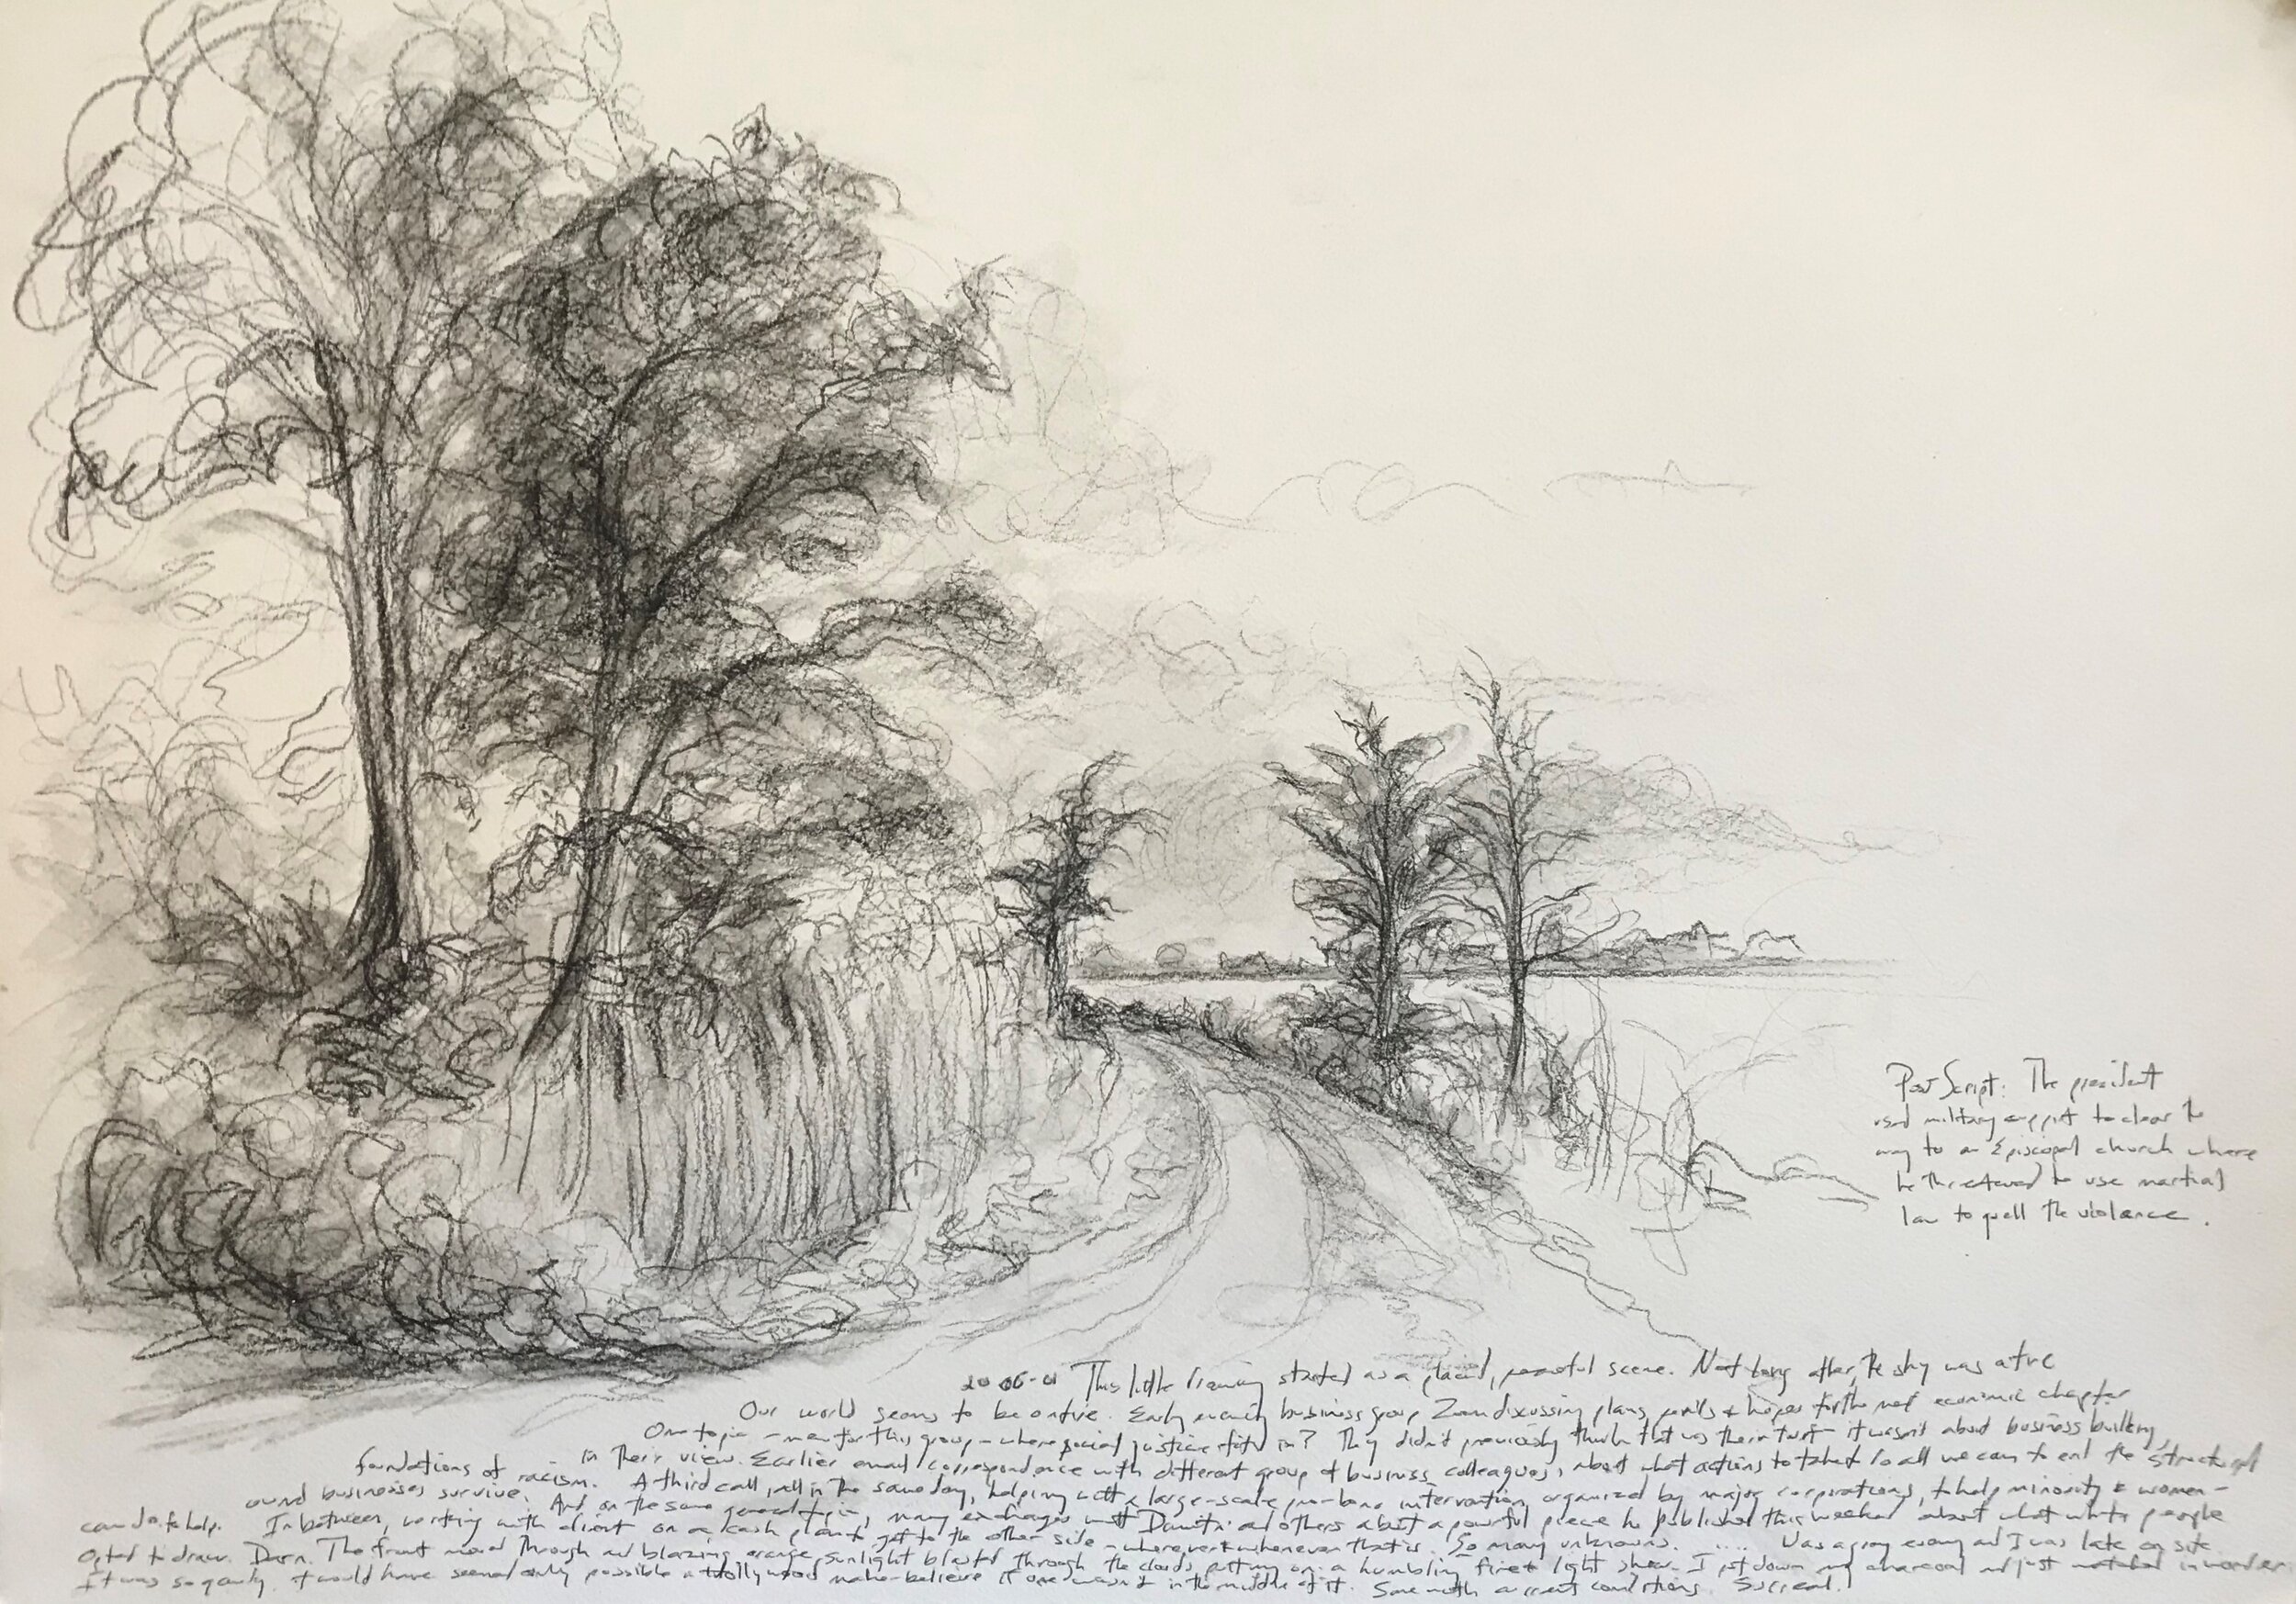 20-06-01   Road to End of Old Quarry  Charcaol on Paper   14 x 20 inches.jpg